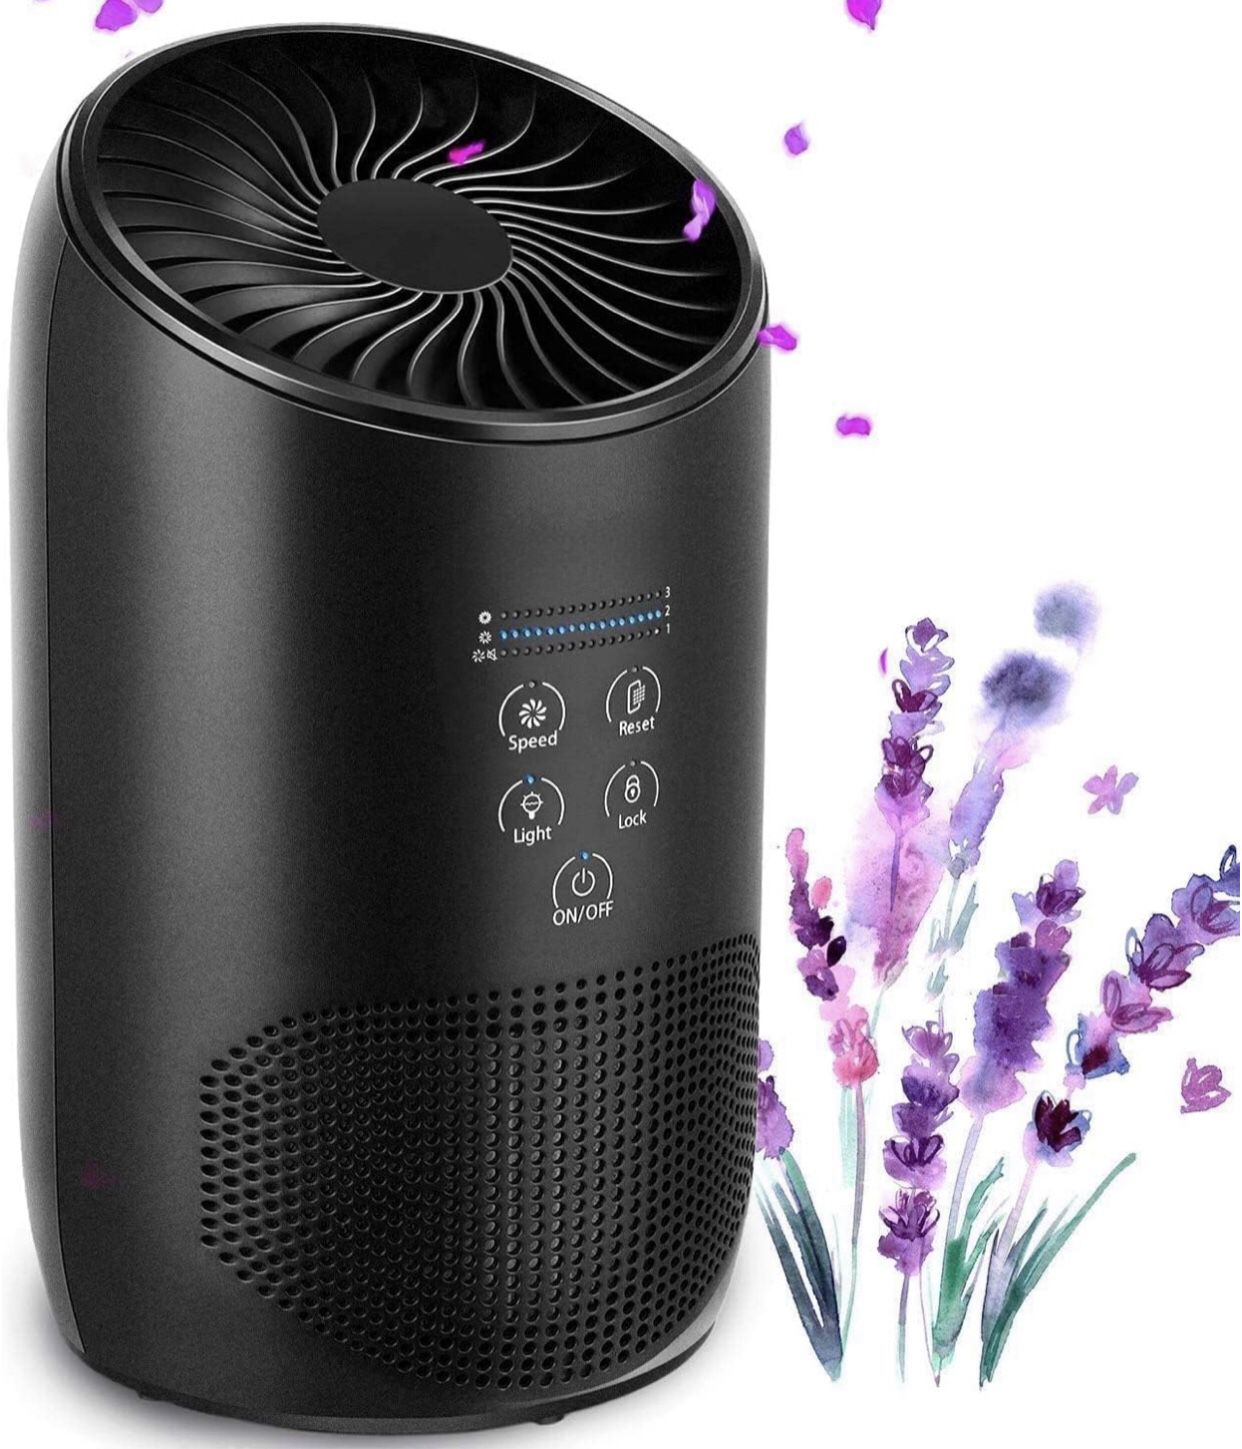 2023 New Upgrade H13 True HEPA Air Purifier with Fragrance Sponge, Effectively Clean 99.97% of Dust, Smoke, Pets Dander, Pollen, Odors